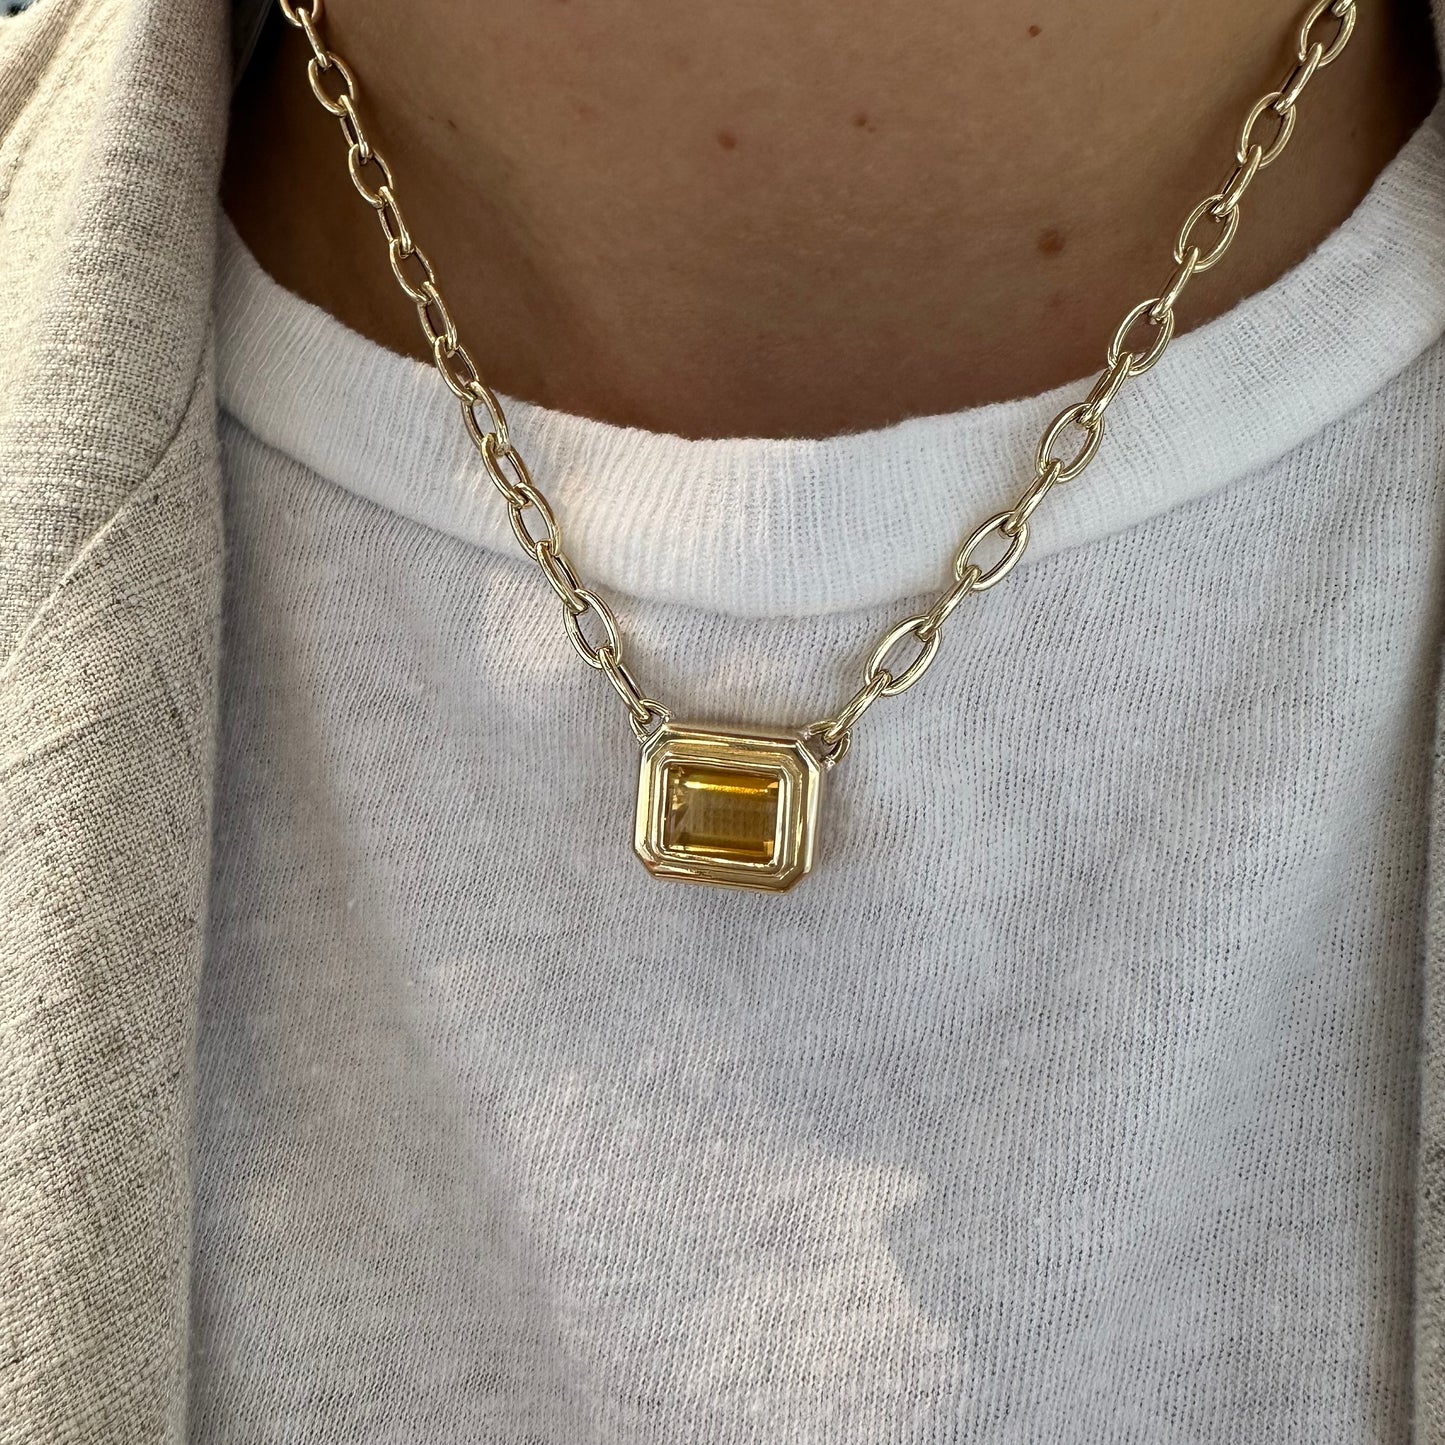 Double Bezel Emarald Cut Citrine on Small Oval Link Necklace